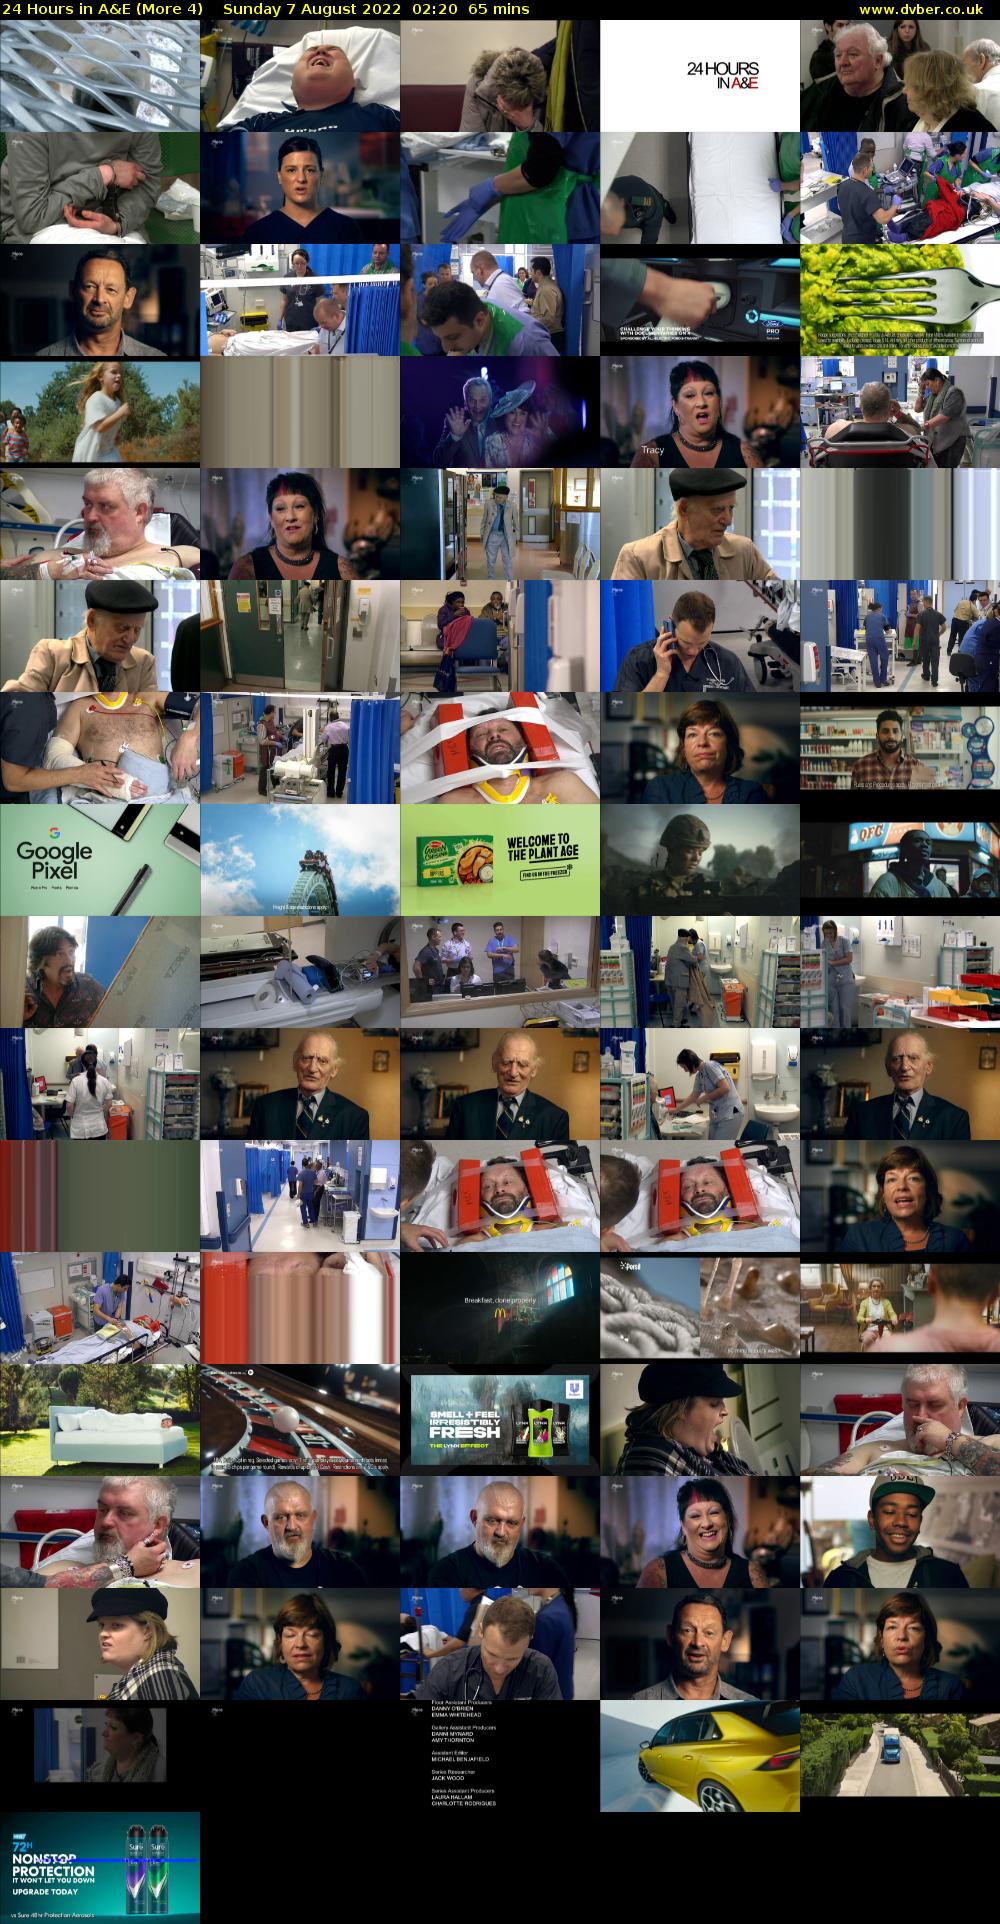 24 Hours in A&E (More 4) Sunday 7 August 2022 02:20 - 03:25